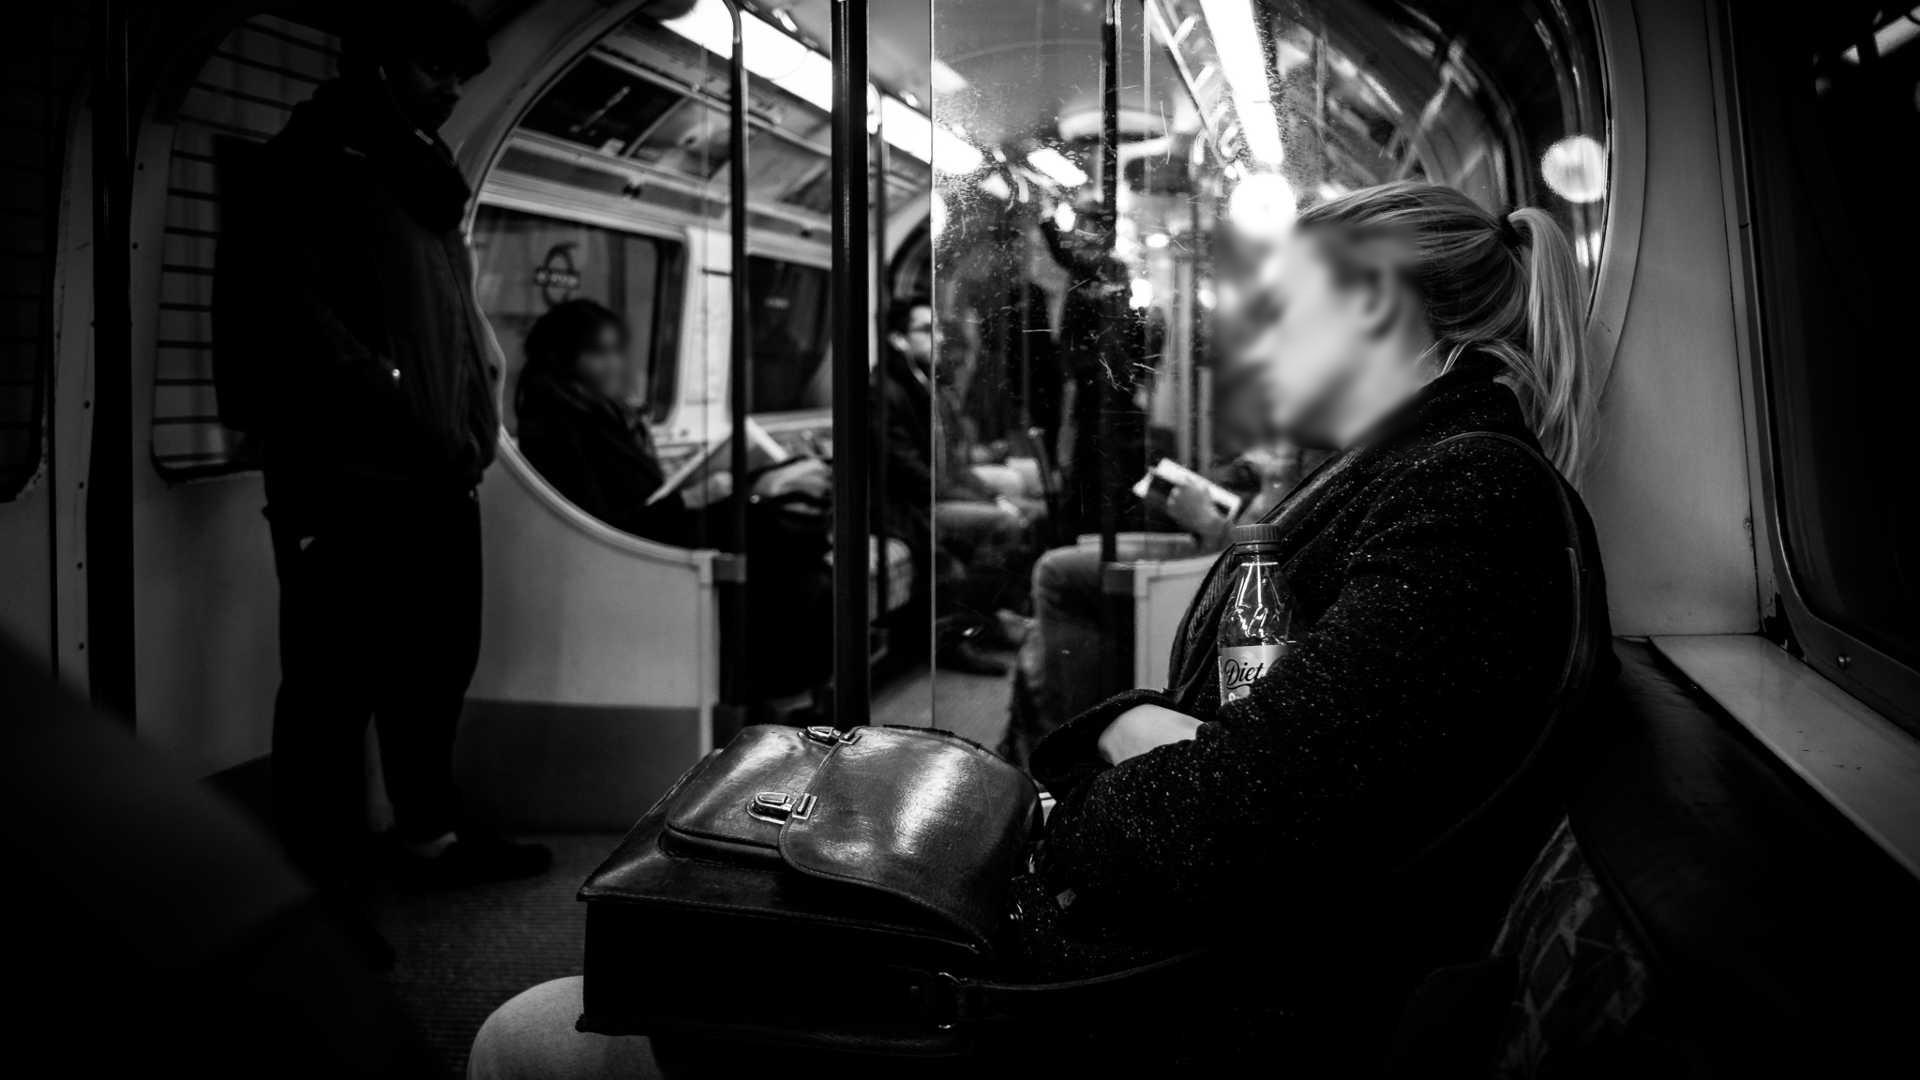 "After work - London, England - Black and white street photography" by Giuseppe Milo, used under CC BY 2.0 / Resampled from original